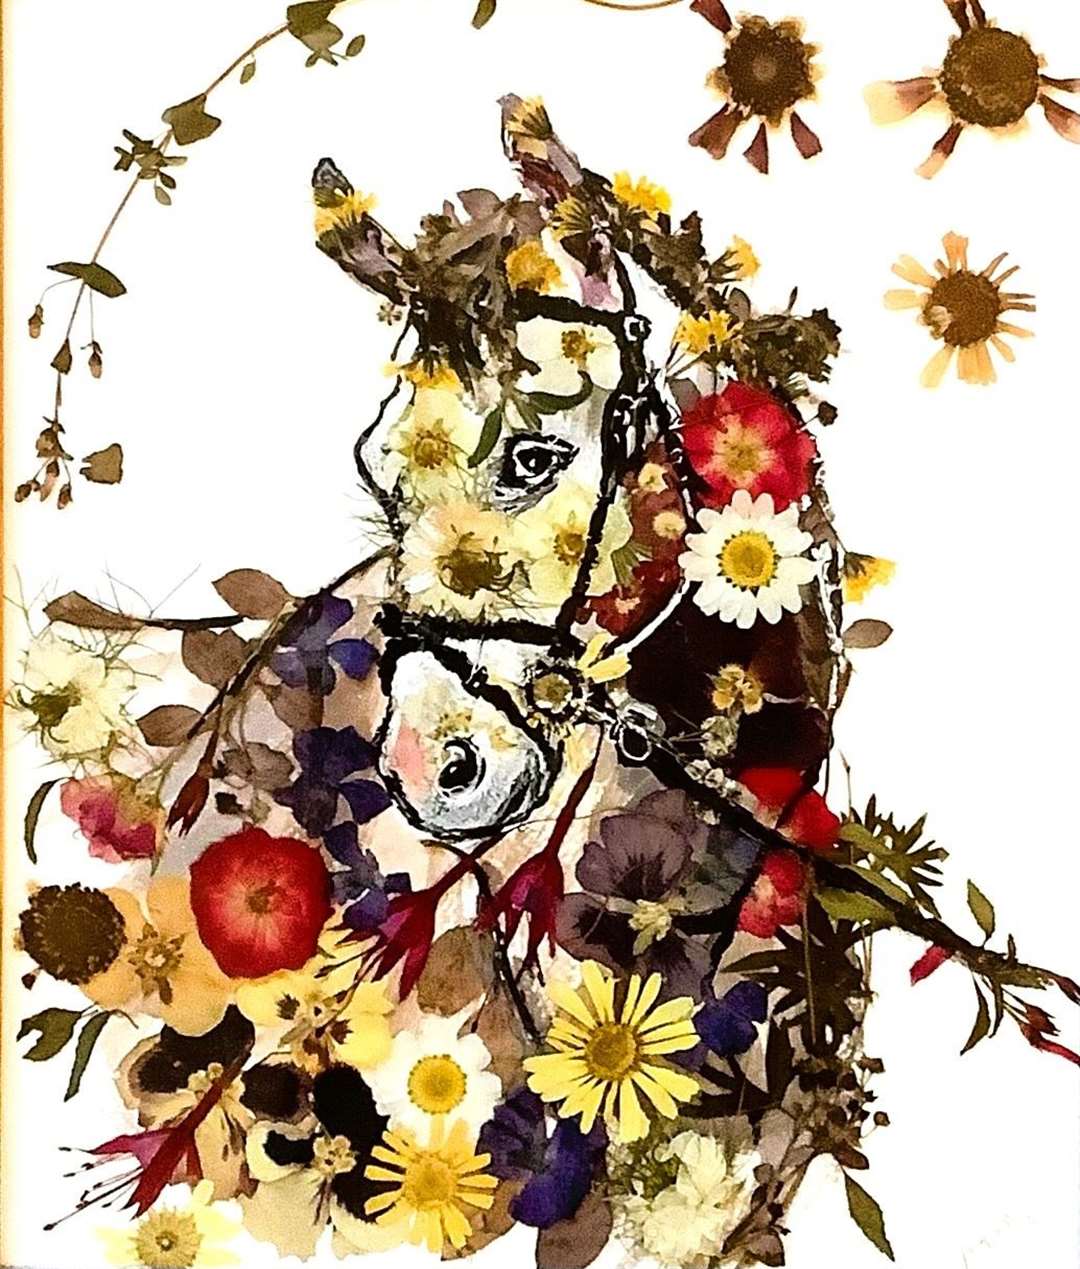 ‘Christie’ – a horse’s portrait. Elaine Rapson-Grant made this Oshibana picture using pressed flowers and leaves that she discovered at a charity shop in Wick.